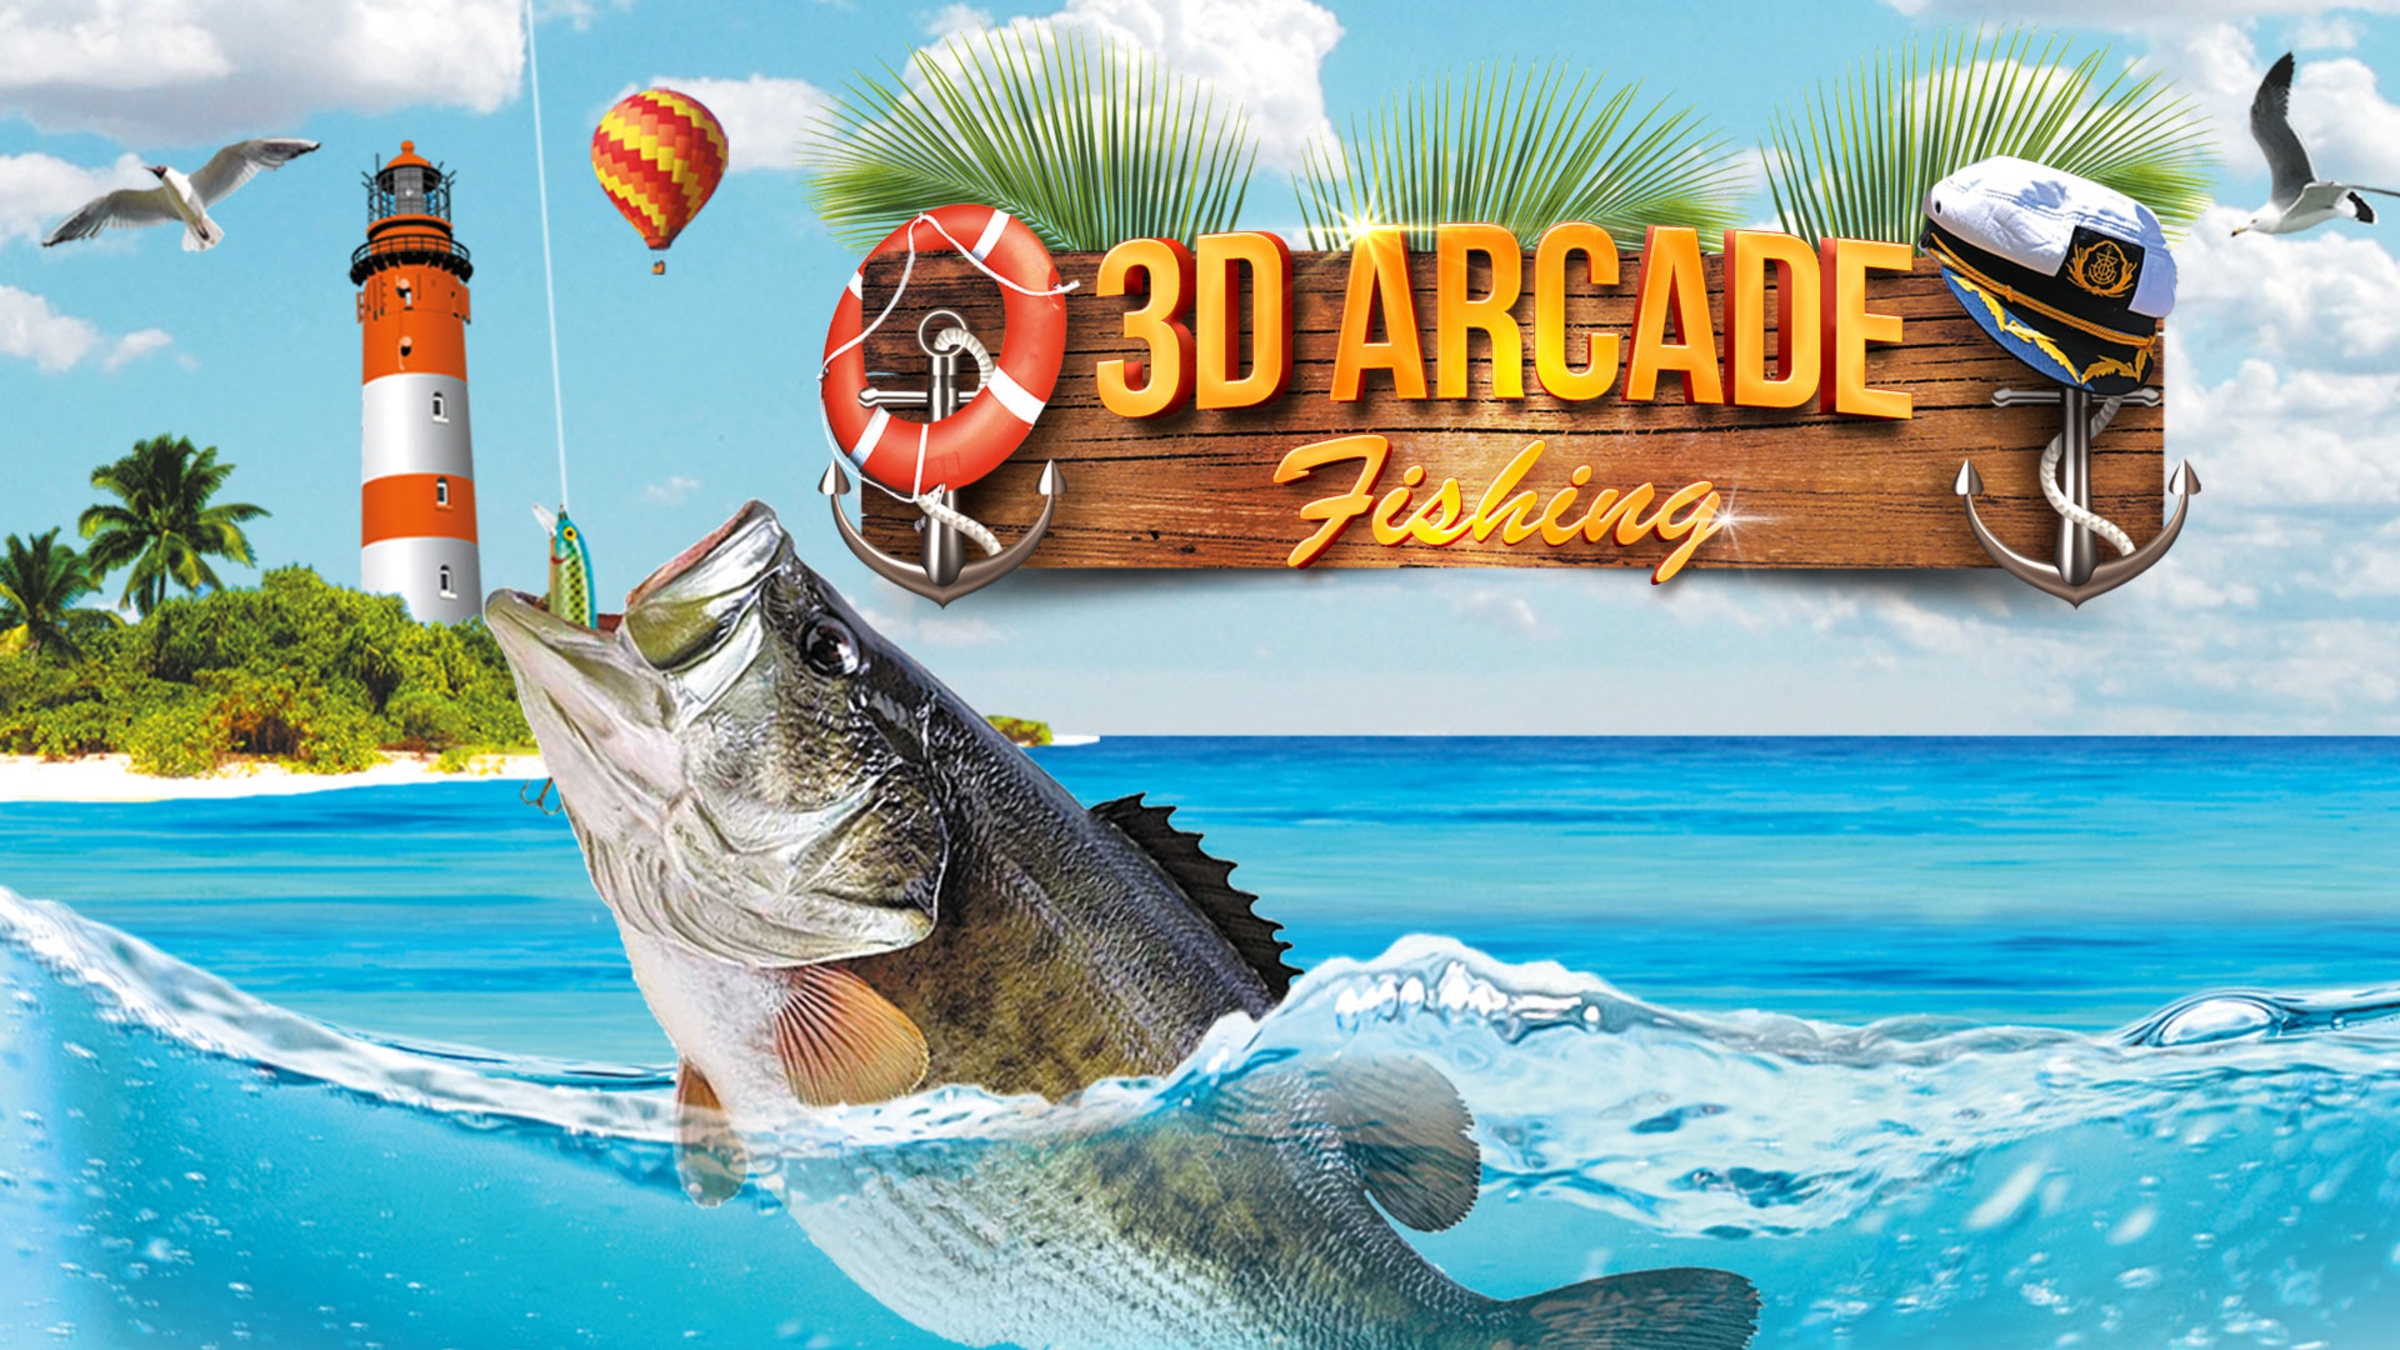 3D Arcade Fishing for Nintendo Switch - Nintendo Official Site